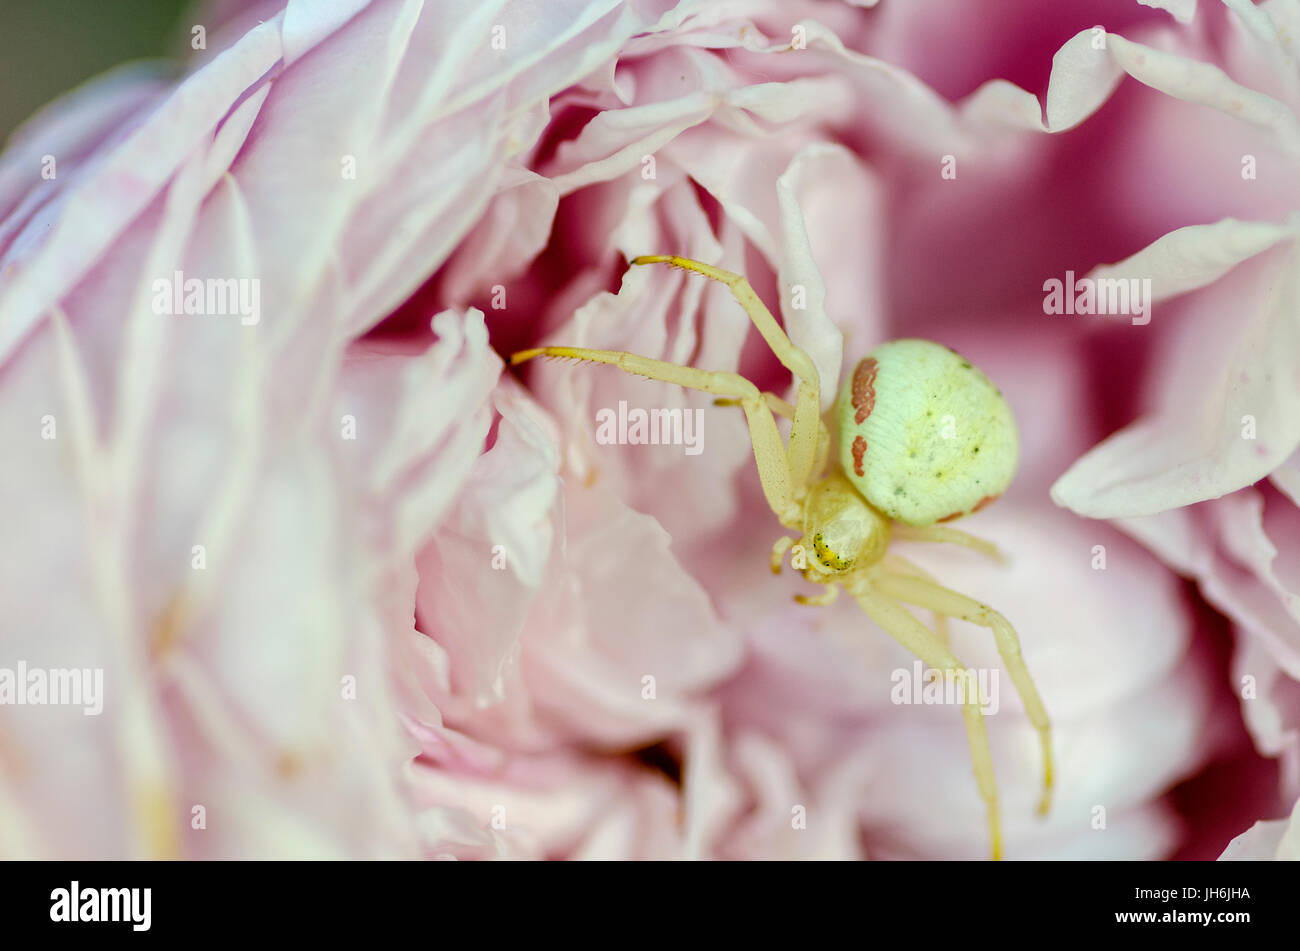 The Thomisidae are a family of spiders, including about 175 genera and over 2,100 species. The common name crab spider is often applied Stock Photo